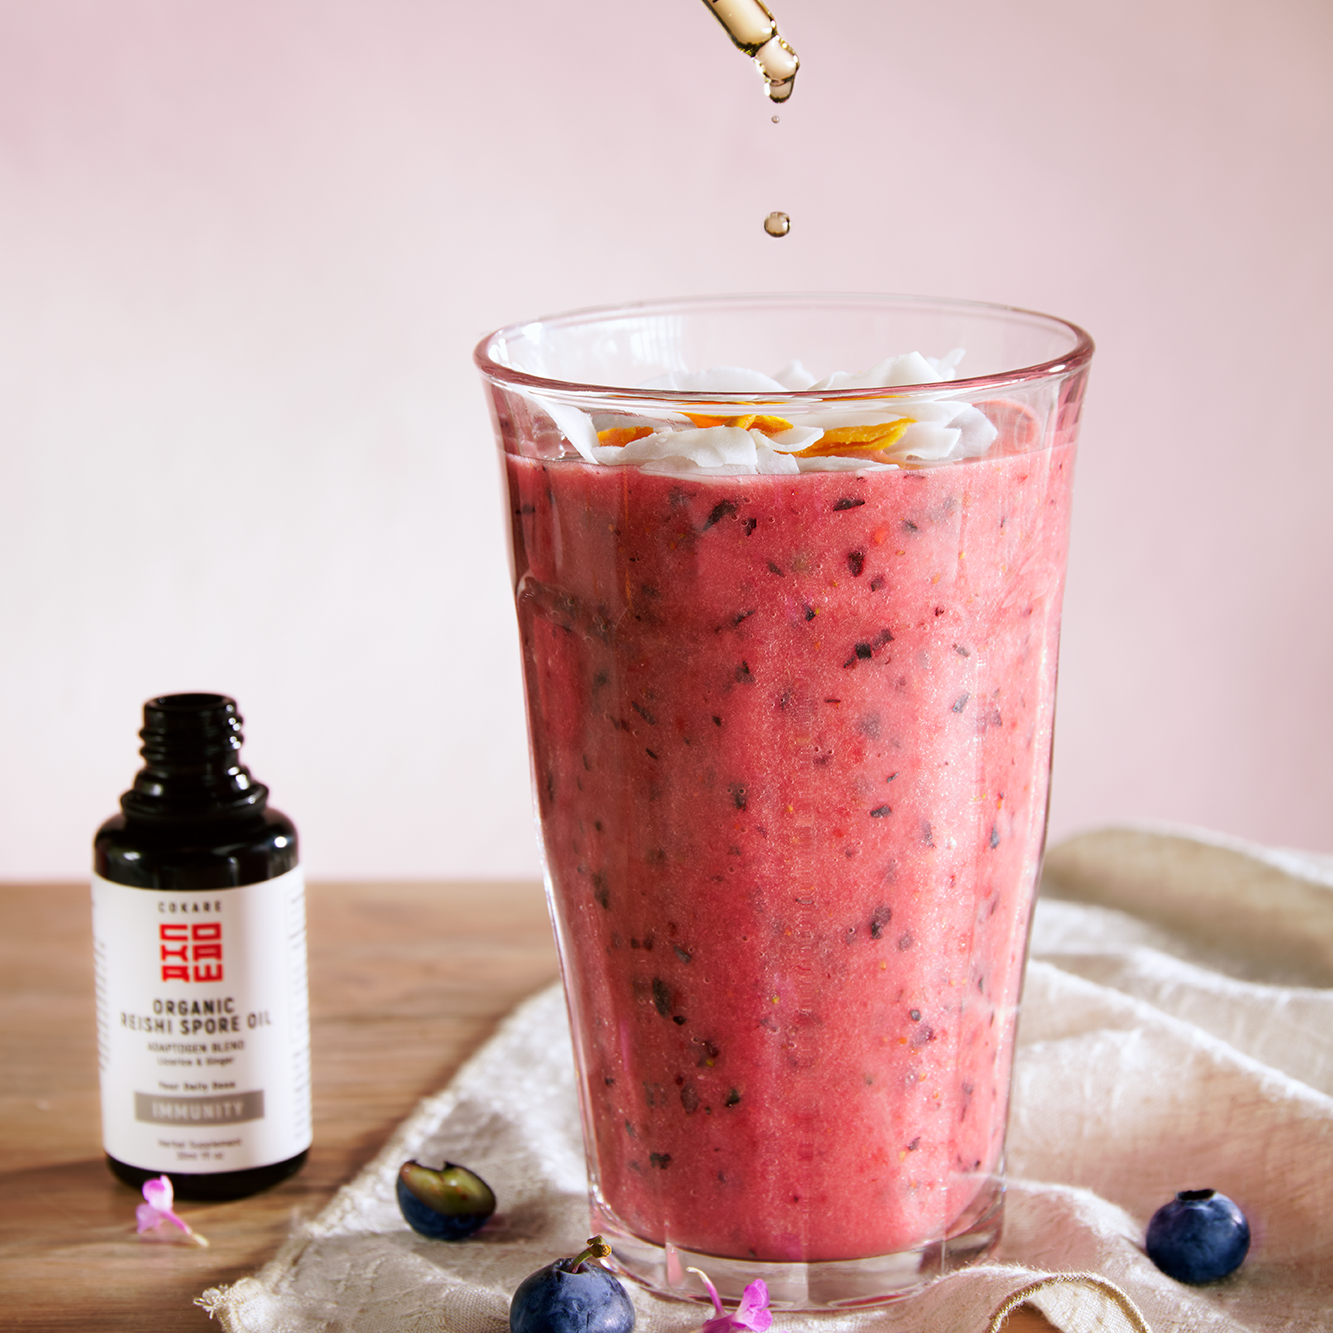 BLUEBERRY AND COCONUT KEFIR SMOOTHIE